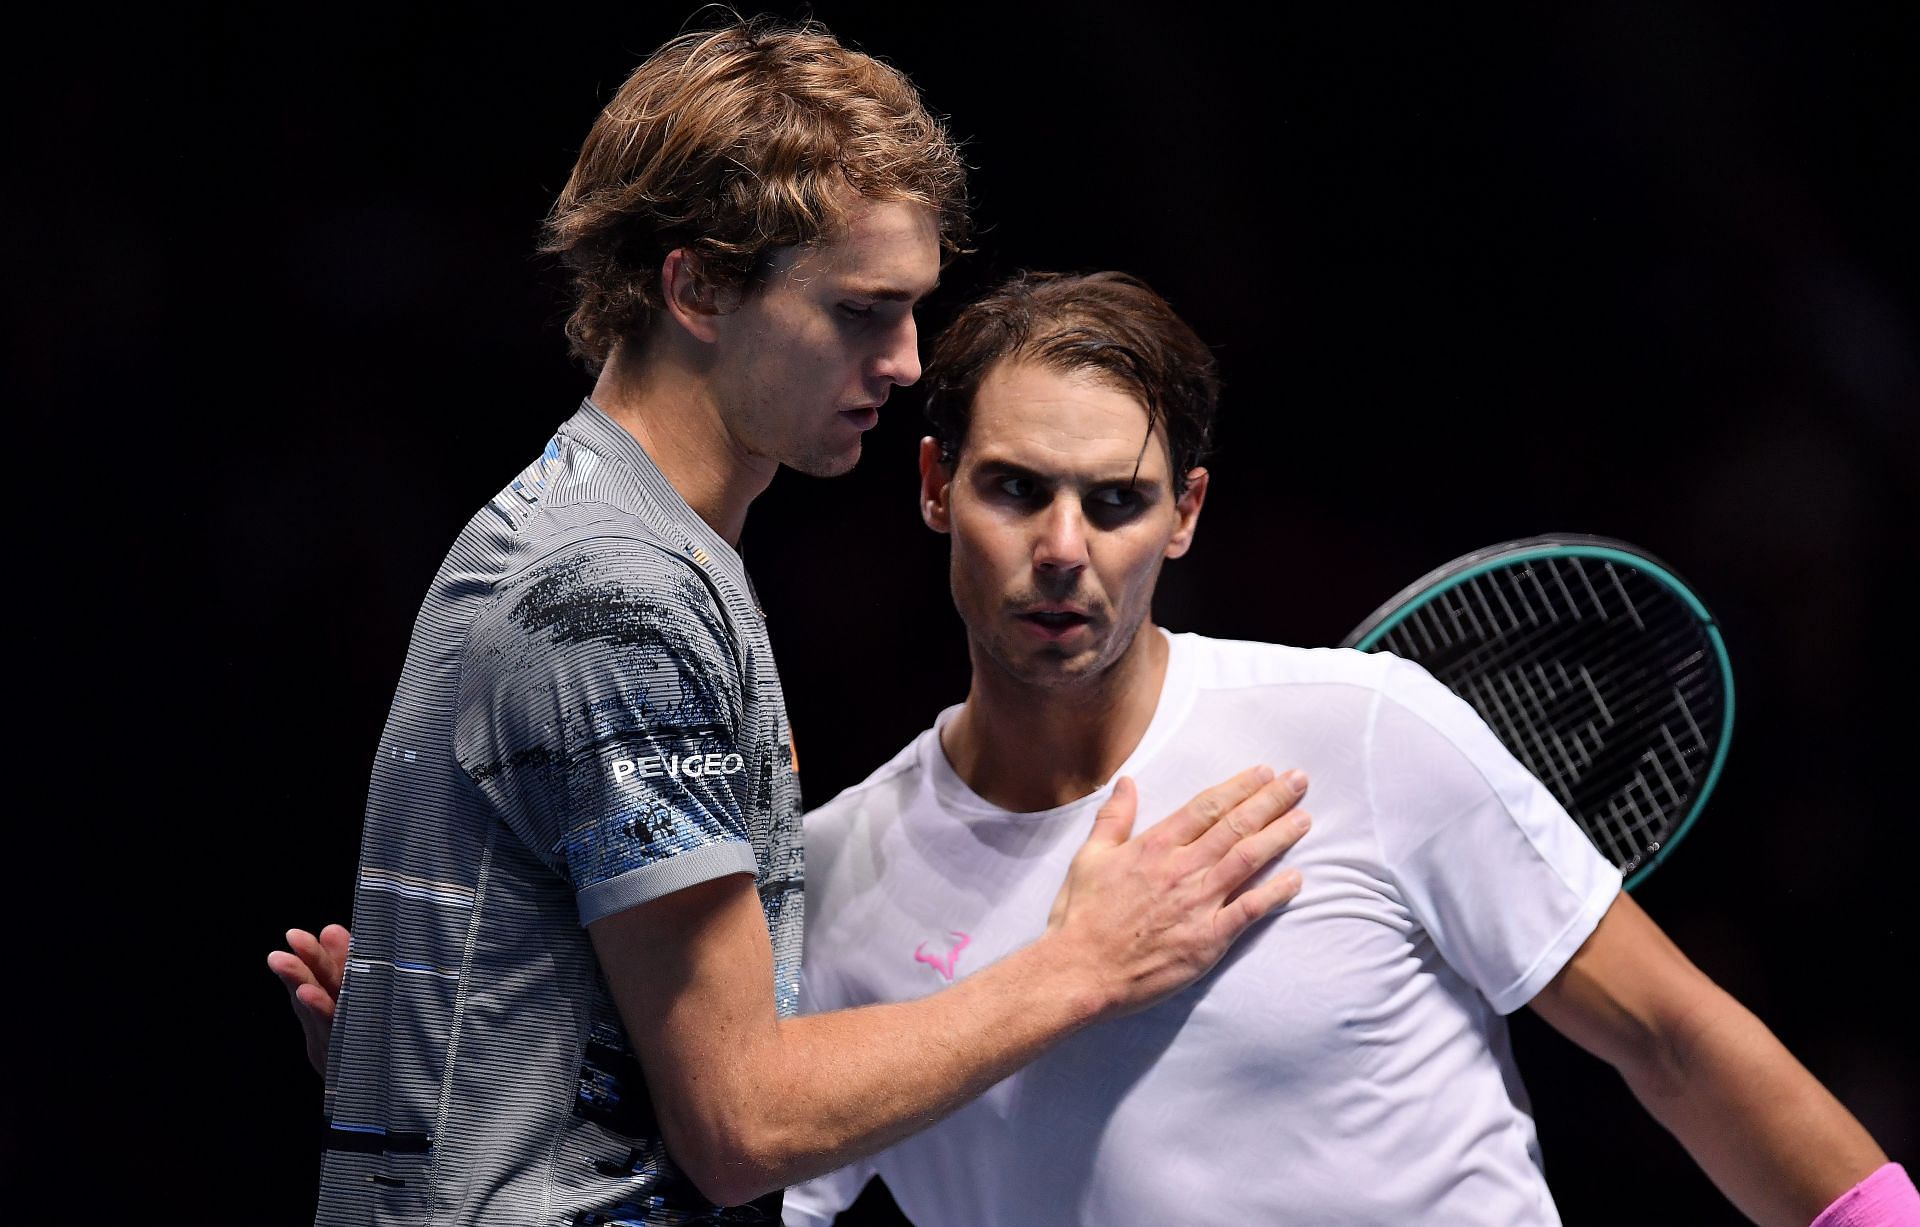 Rafael Nadal and Alexander Zverev after their match at the 2019 ATP Finals